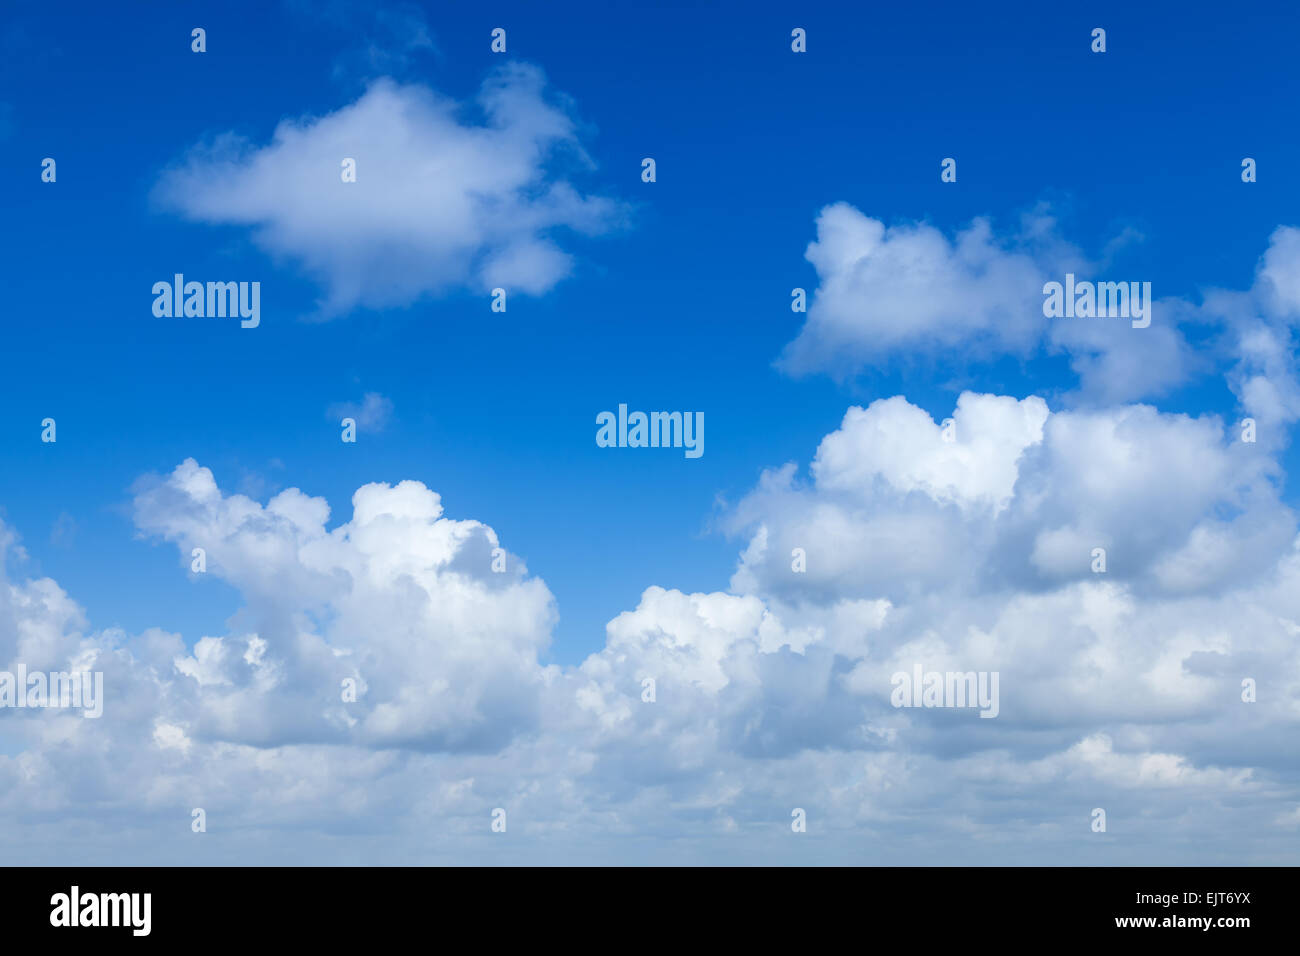 Bright blue sky with white clouds Stock Photo